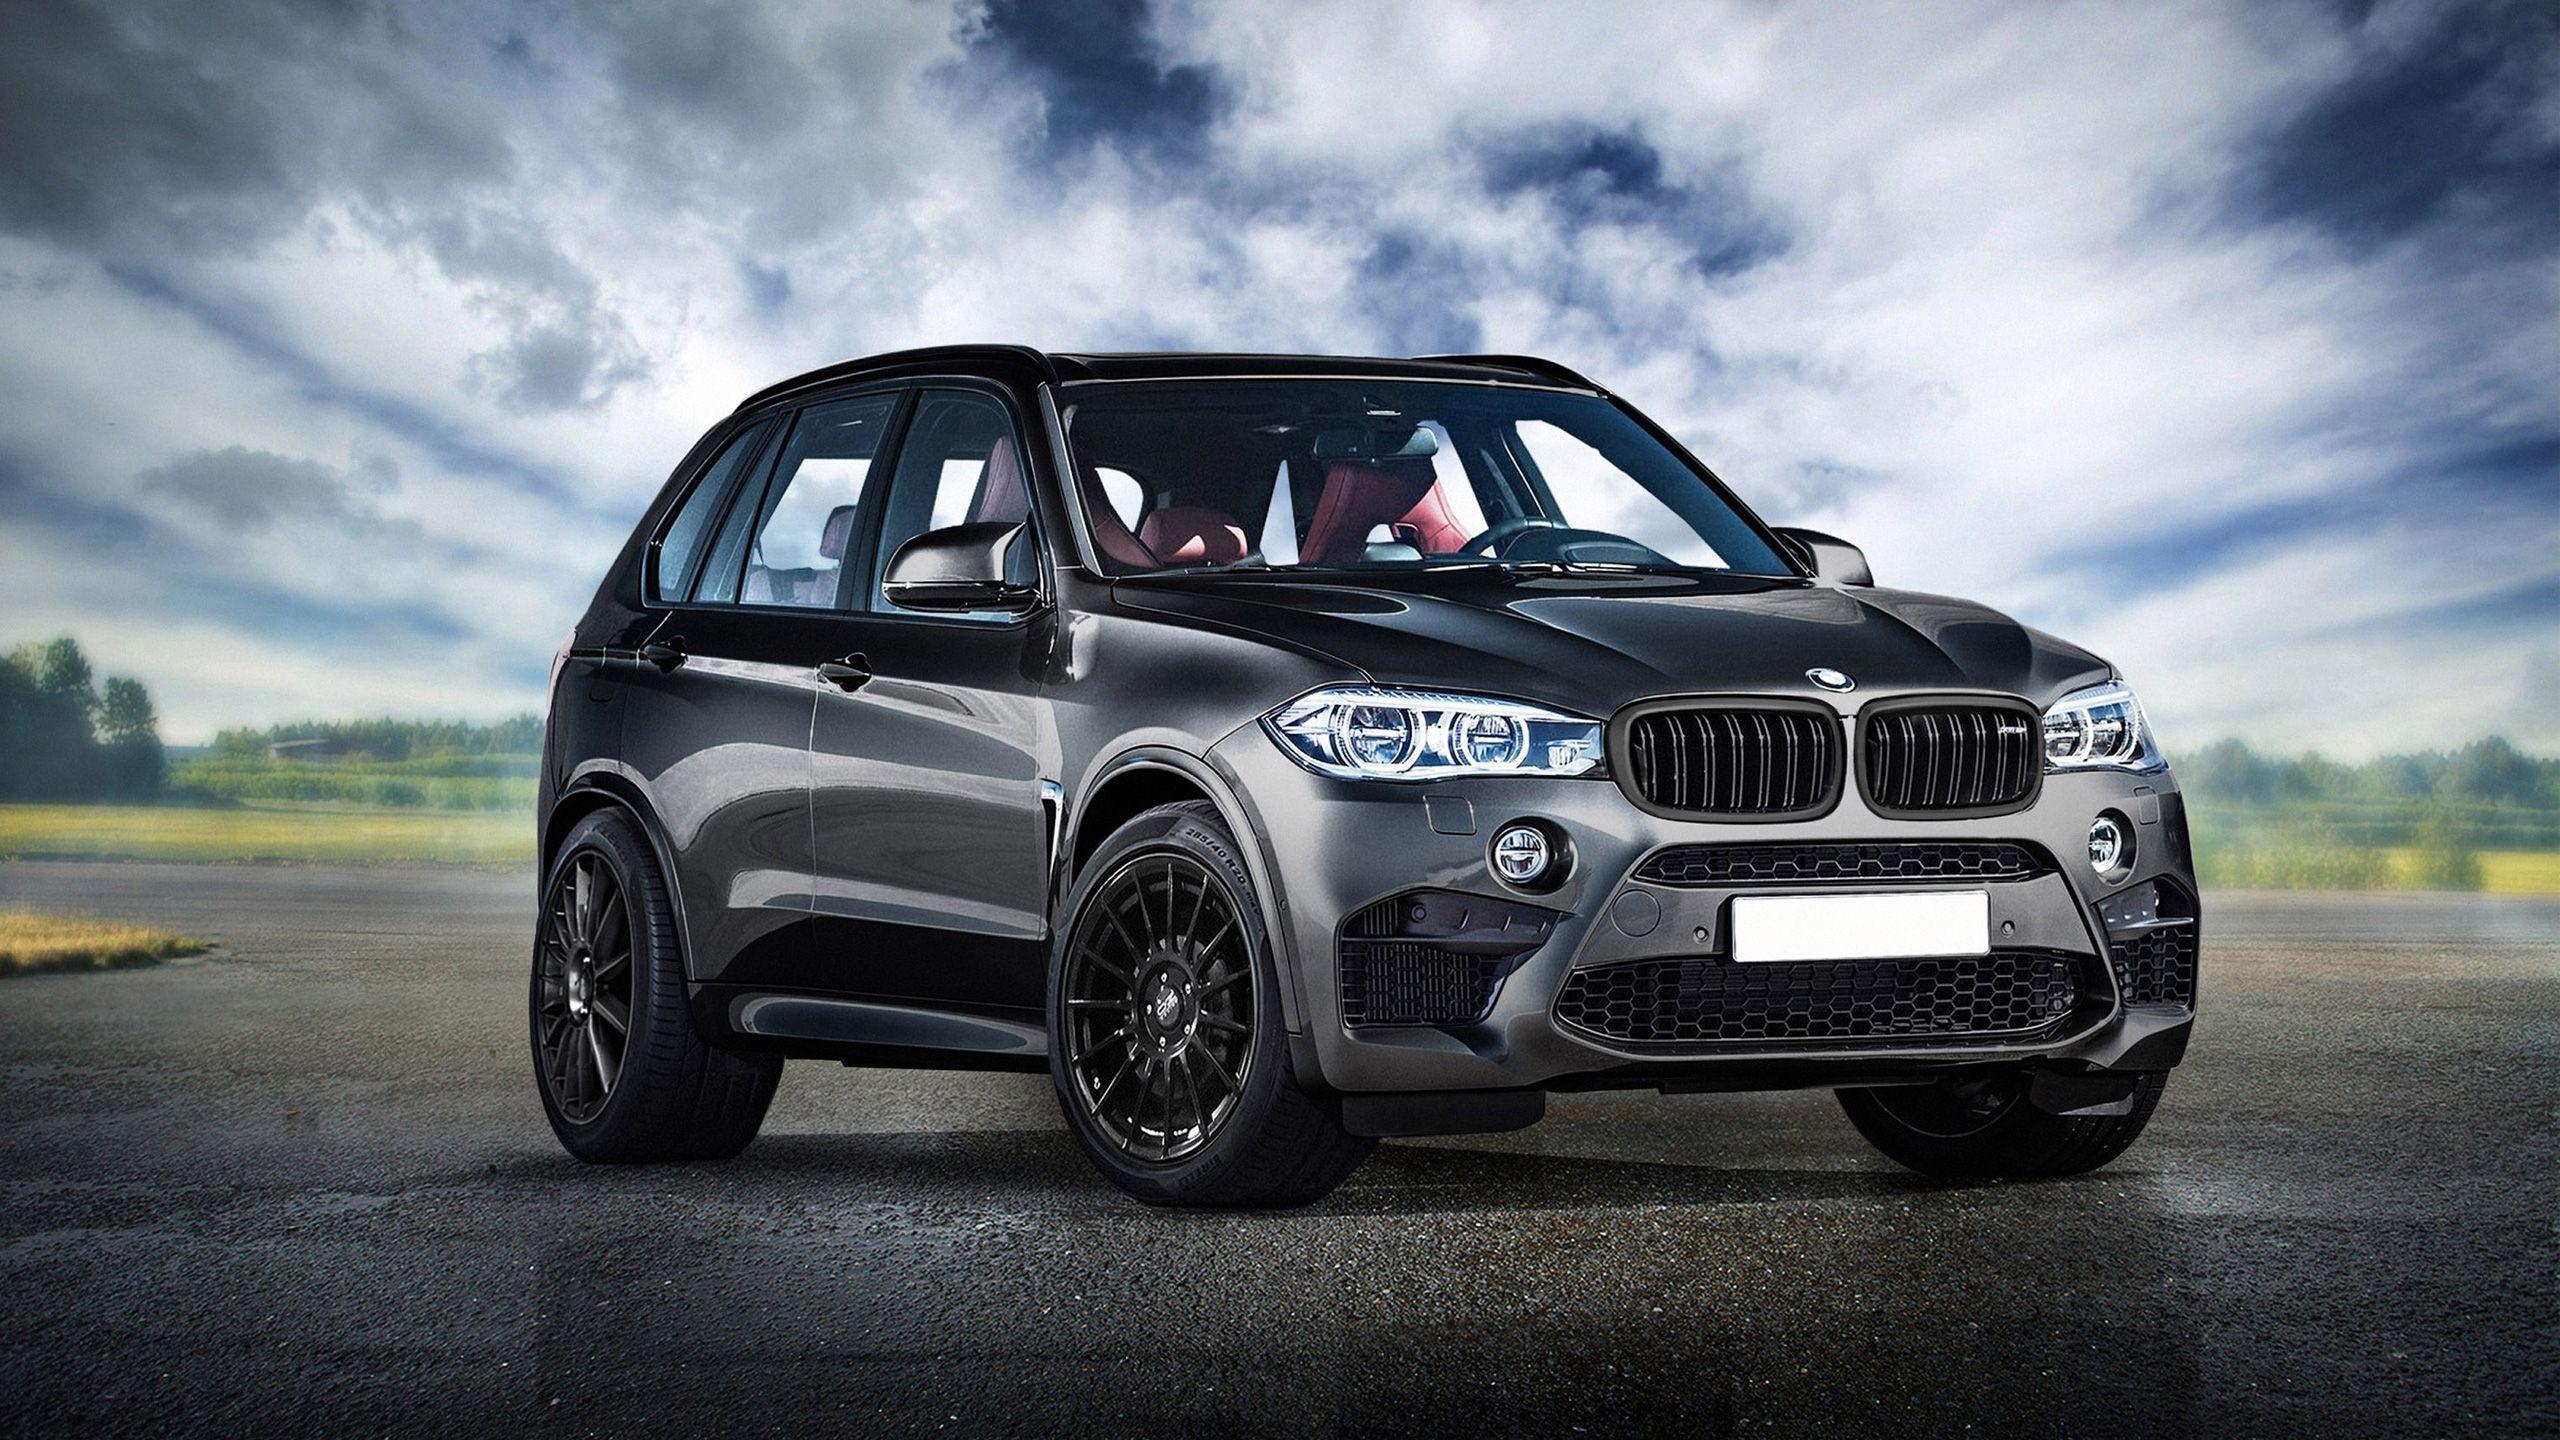 Download wallpapers BMW X5, F15, 2017, topcar, Tuning X5, black BMW,  crossovers, German cars, BMW for desktop free. Pictures for desktop free